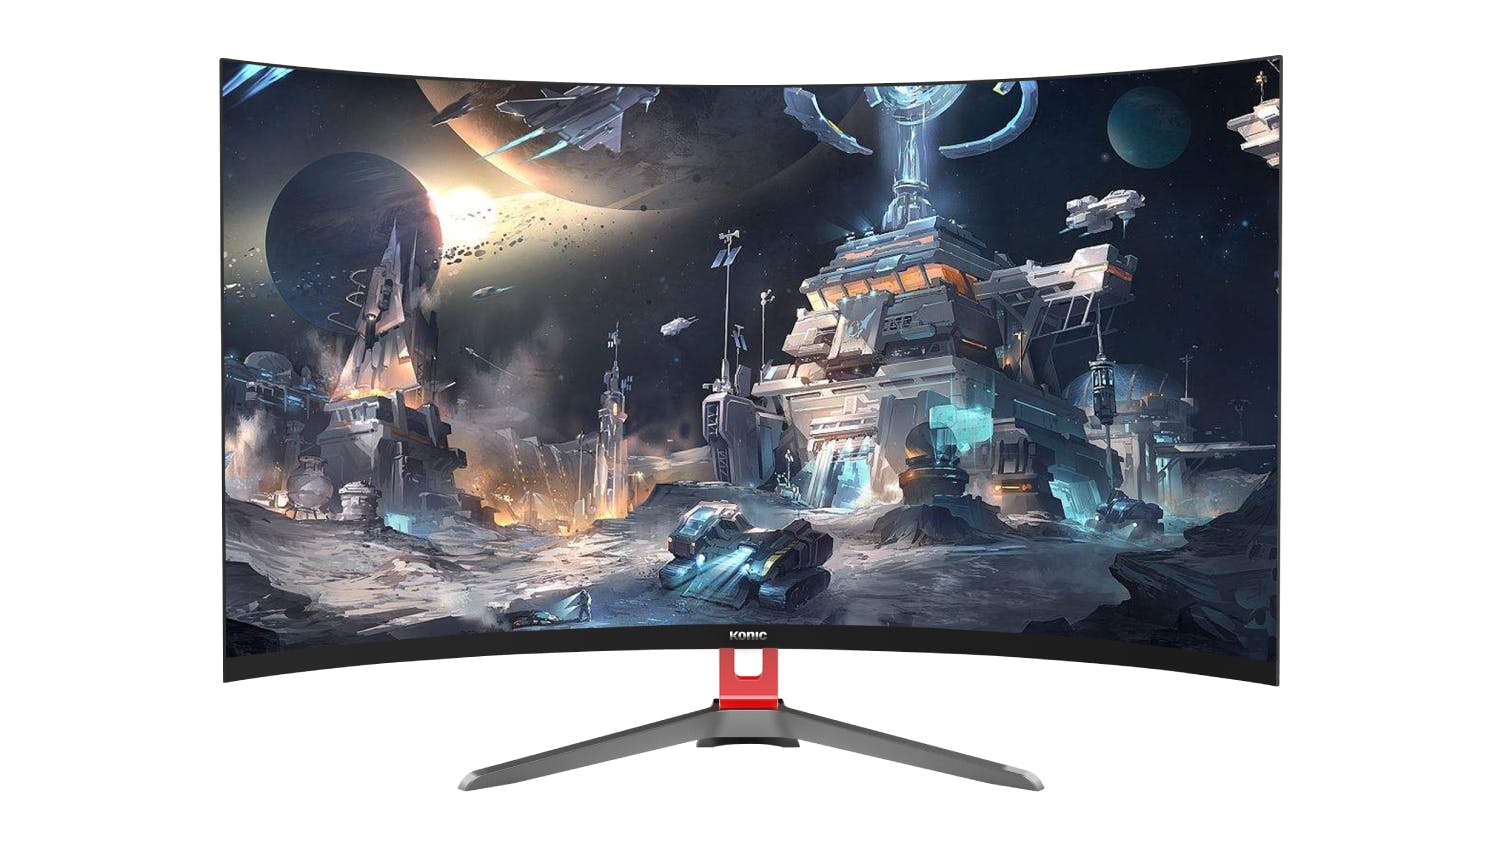 Konic 27 Curved Fhd Gaming Monitor 1920x1080 144hz 4ms Harvey Norman New Zealand